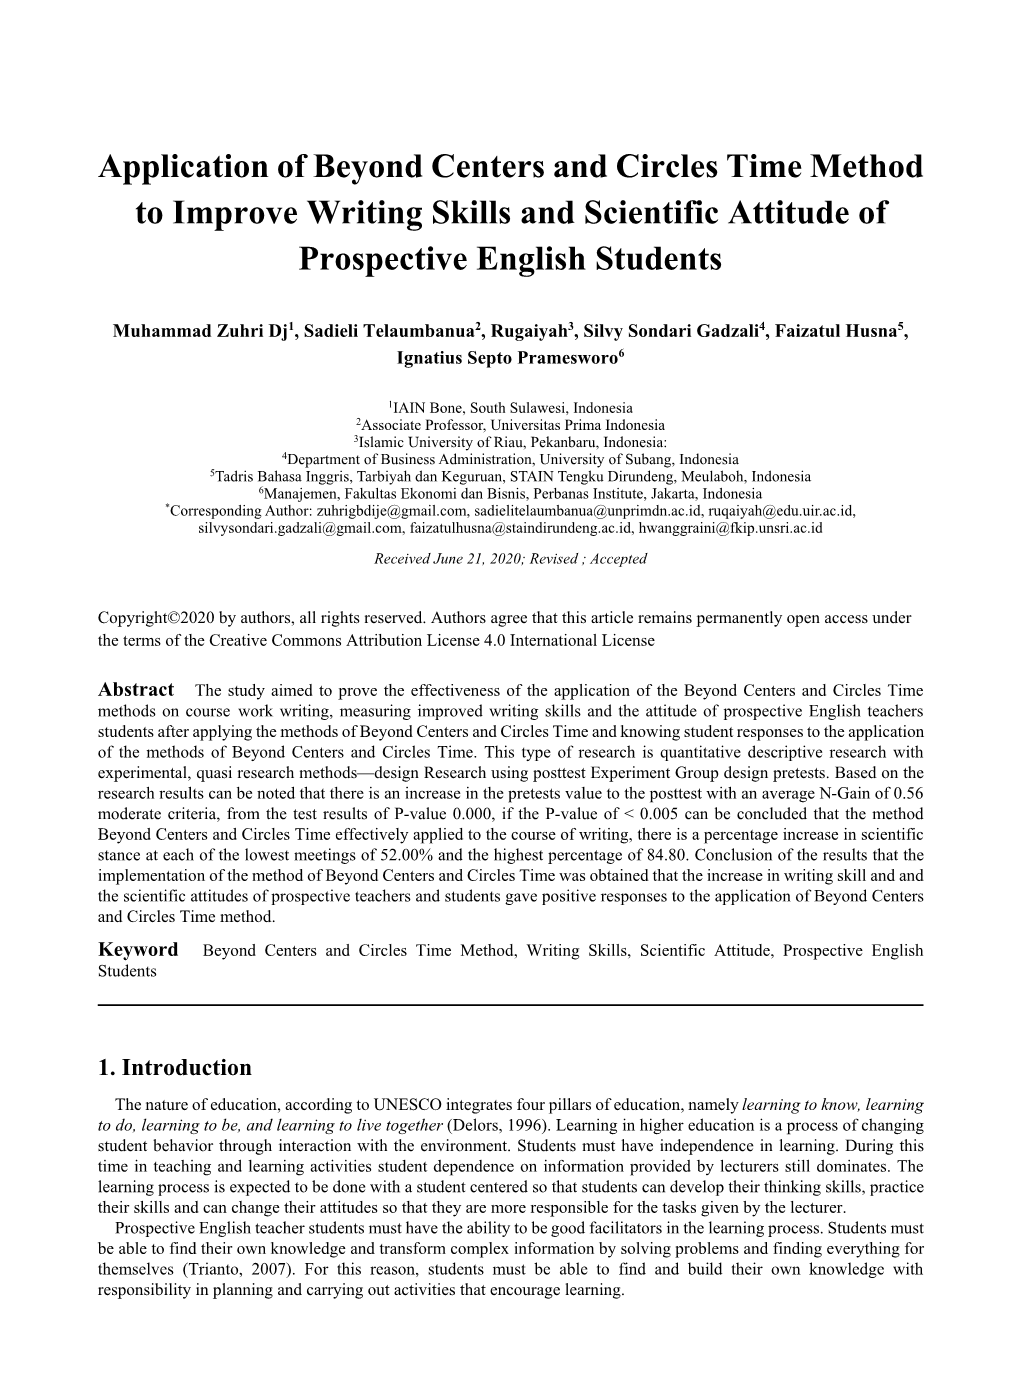 Application of Beyond Centers and Circles Time Method to Improve Writing Skills and Scientific Attitude of Prospective English Students